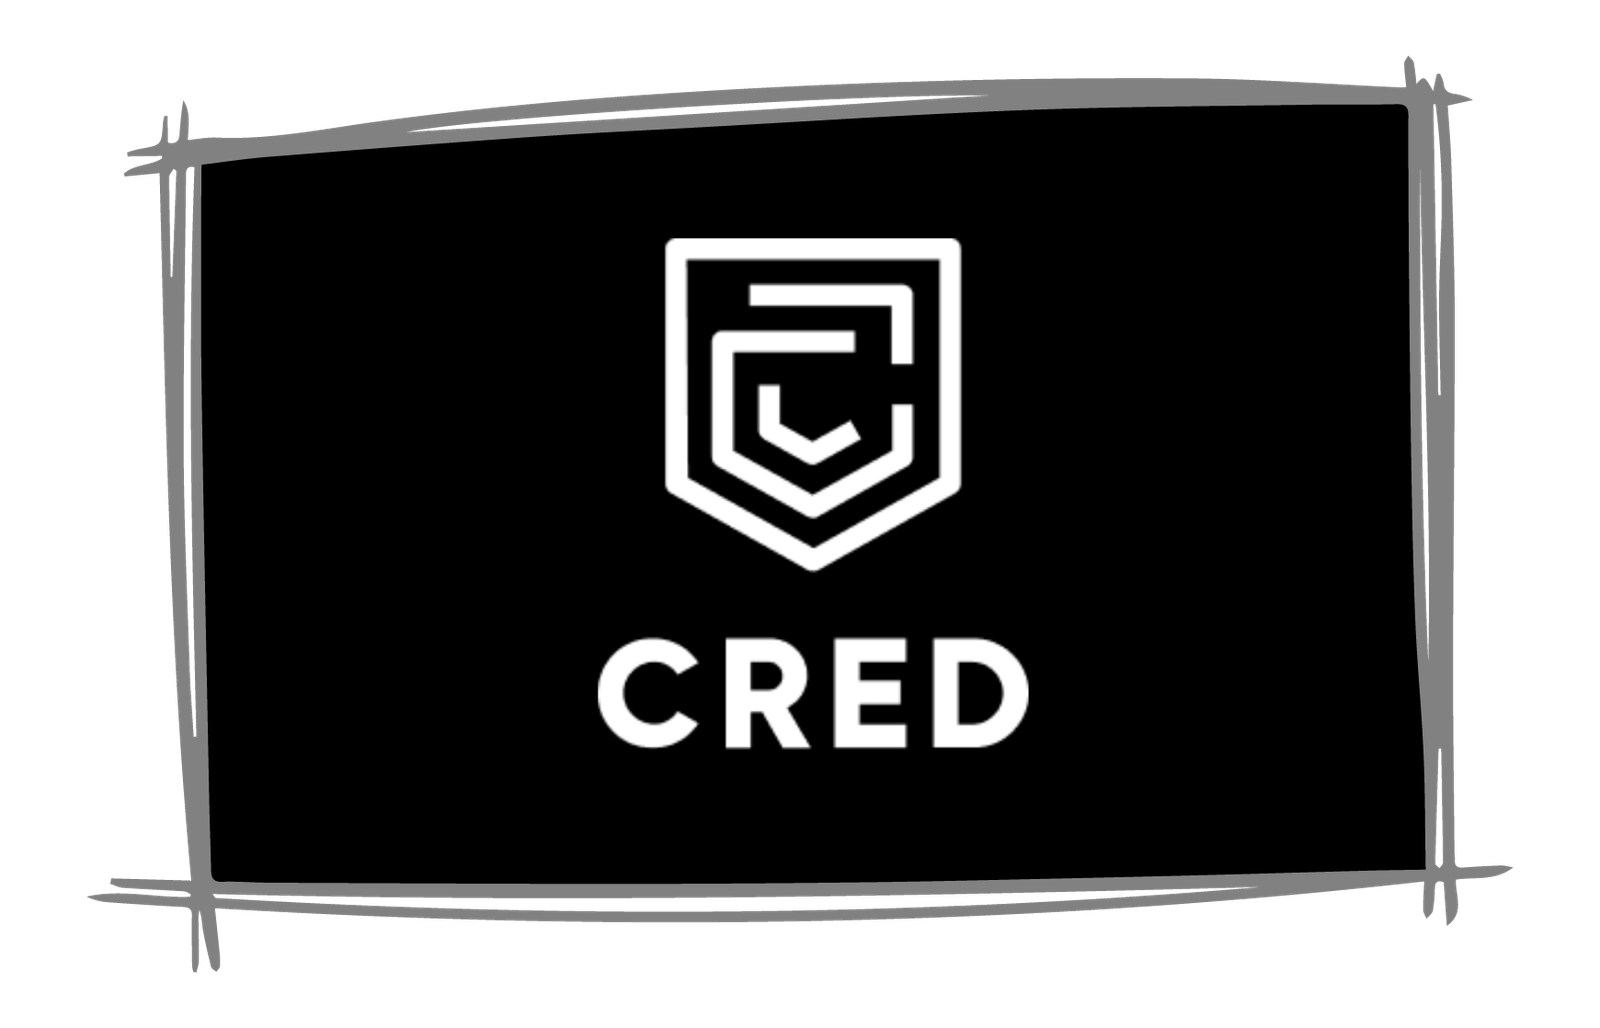 CRED’s brand positioning